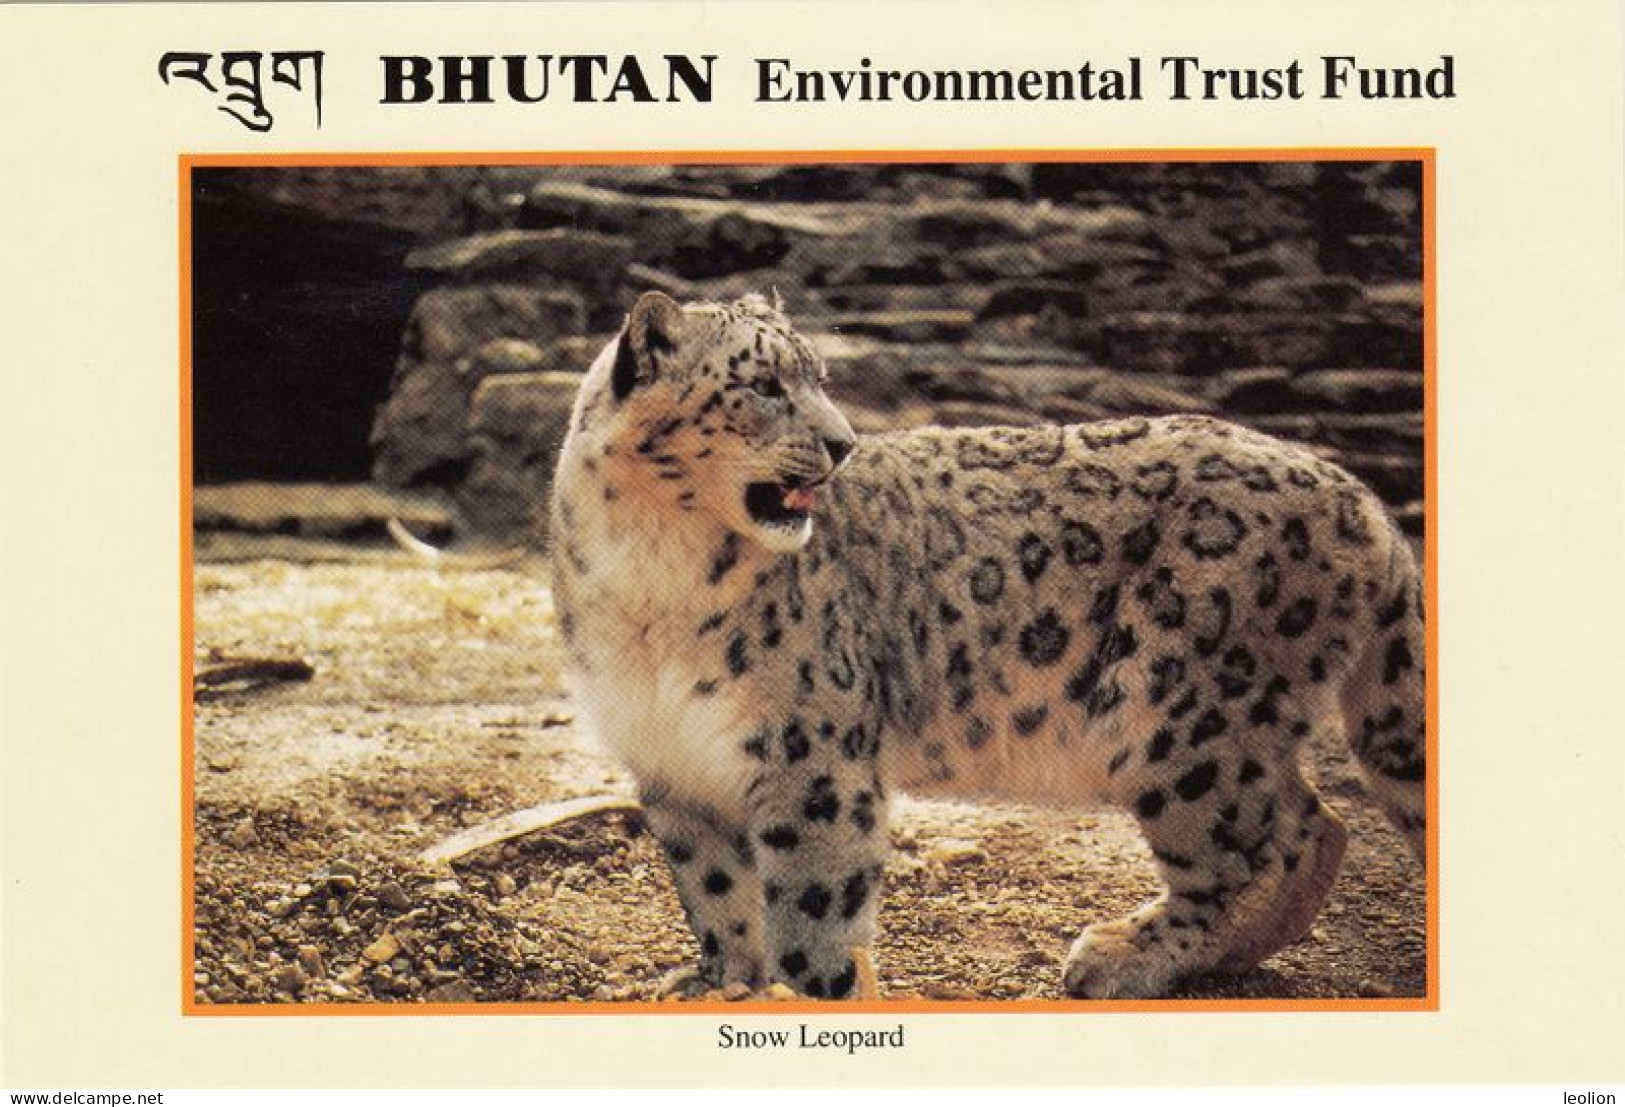 BHUTAN Post 1993 set of 17 Environmental Trust Fund Postcards, unused in cover Bhoutan Fauna Flora P&T issue